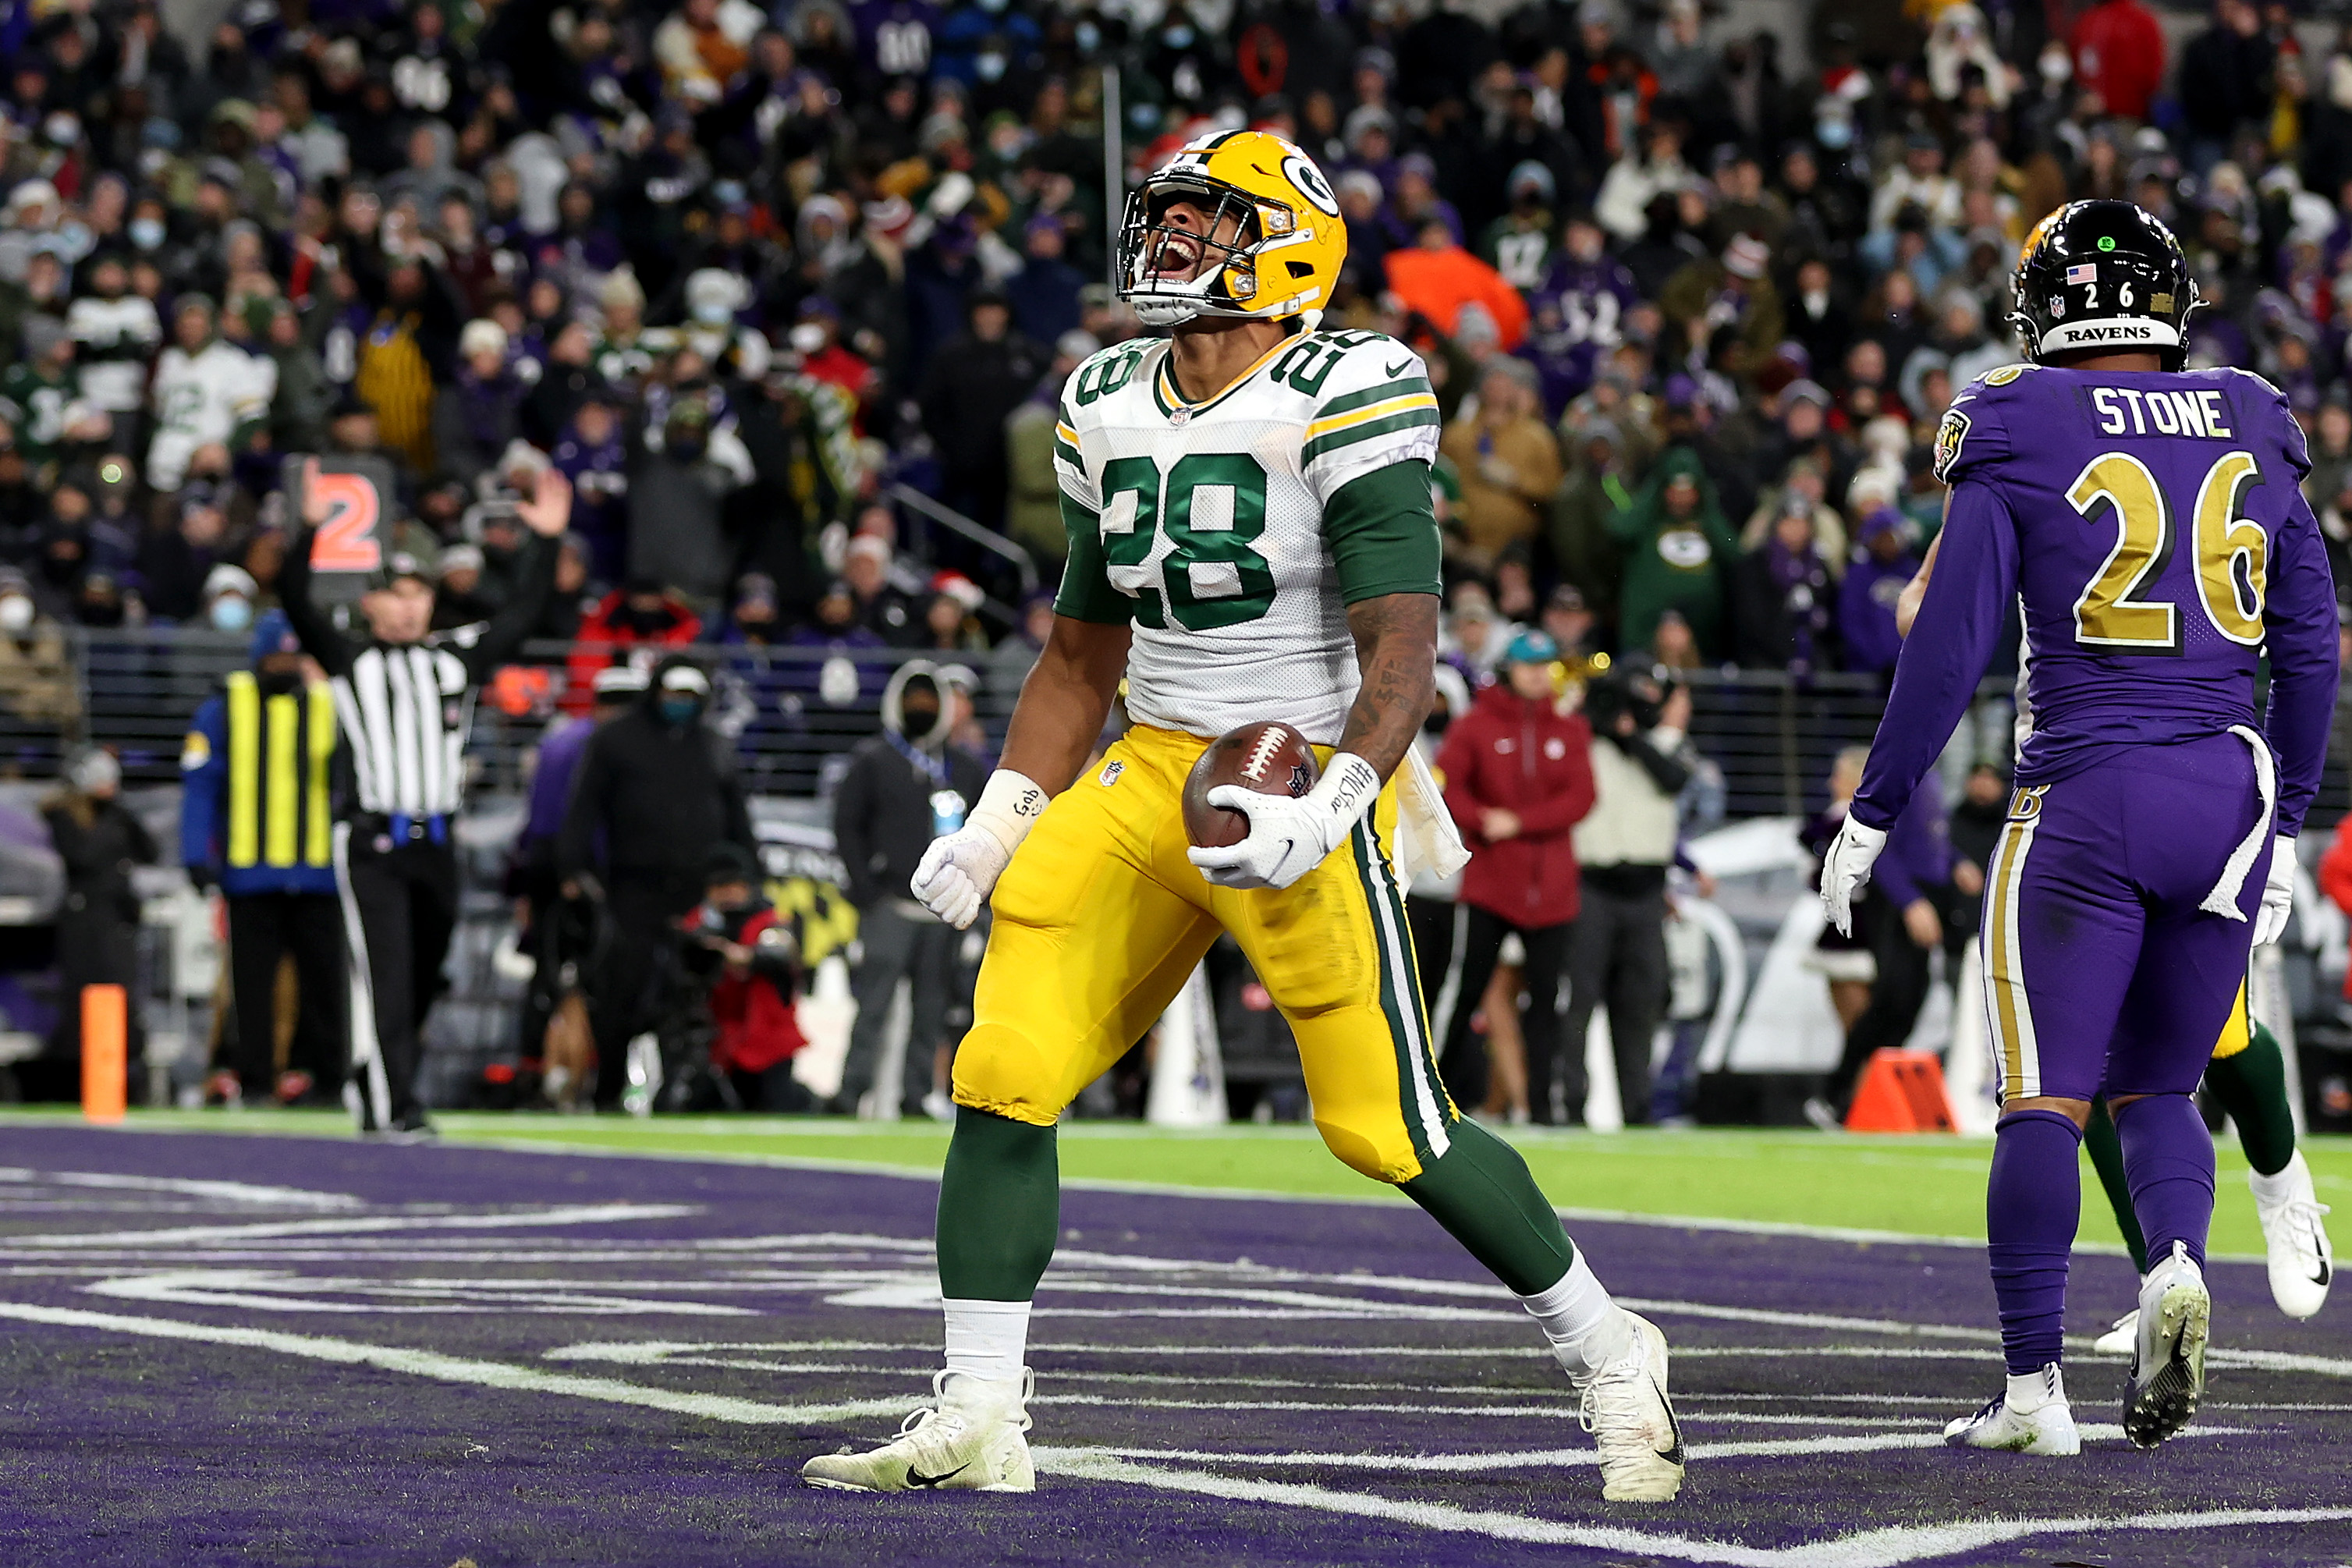 AJ Dillon of the Green Bay Packers reacts after scoring a rushing touchdown against the Baltimore Ravens.